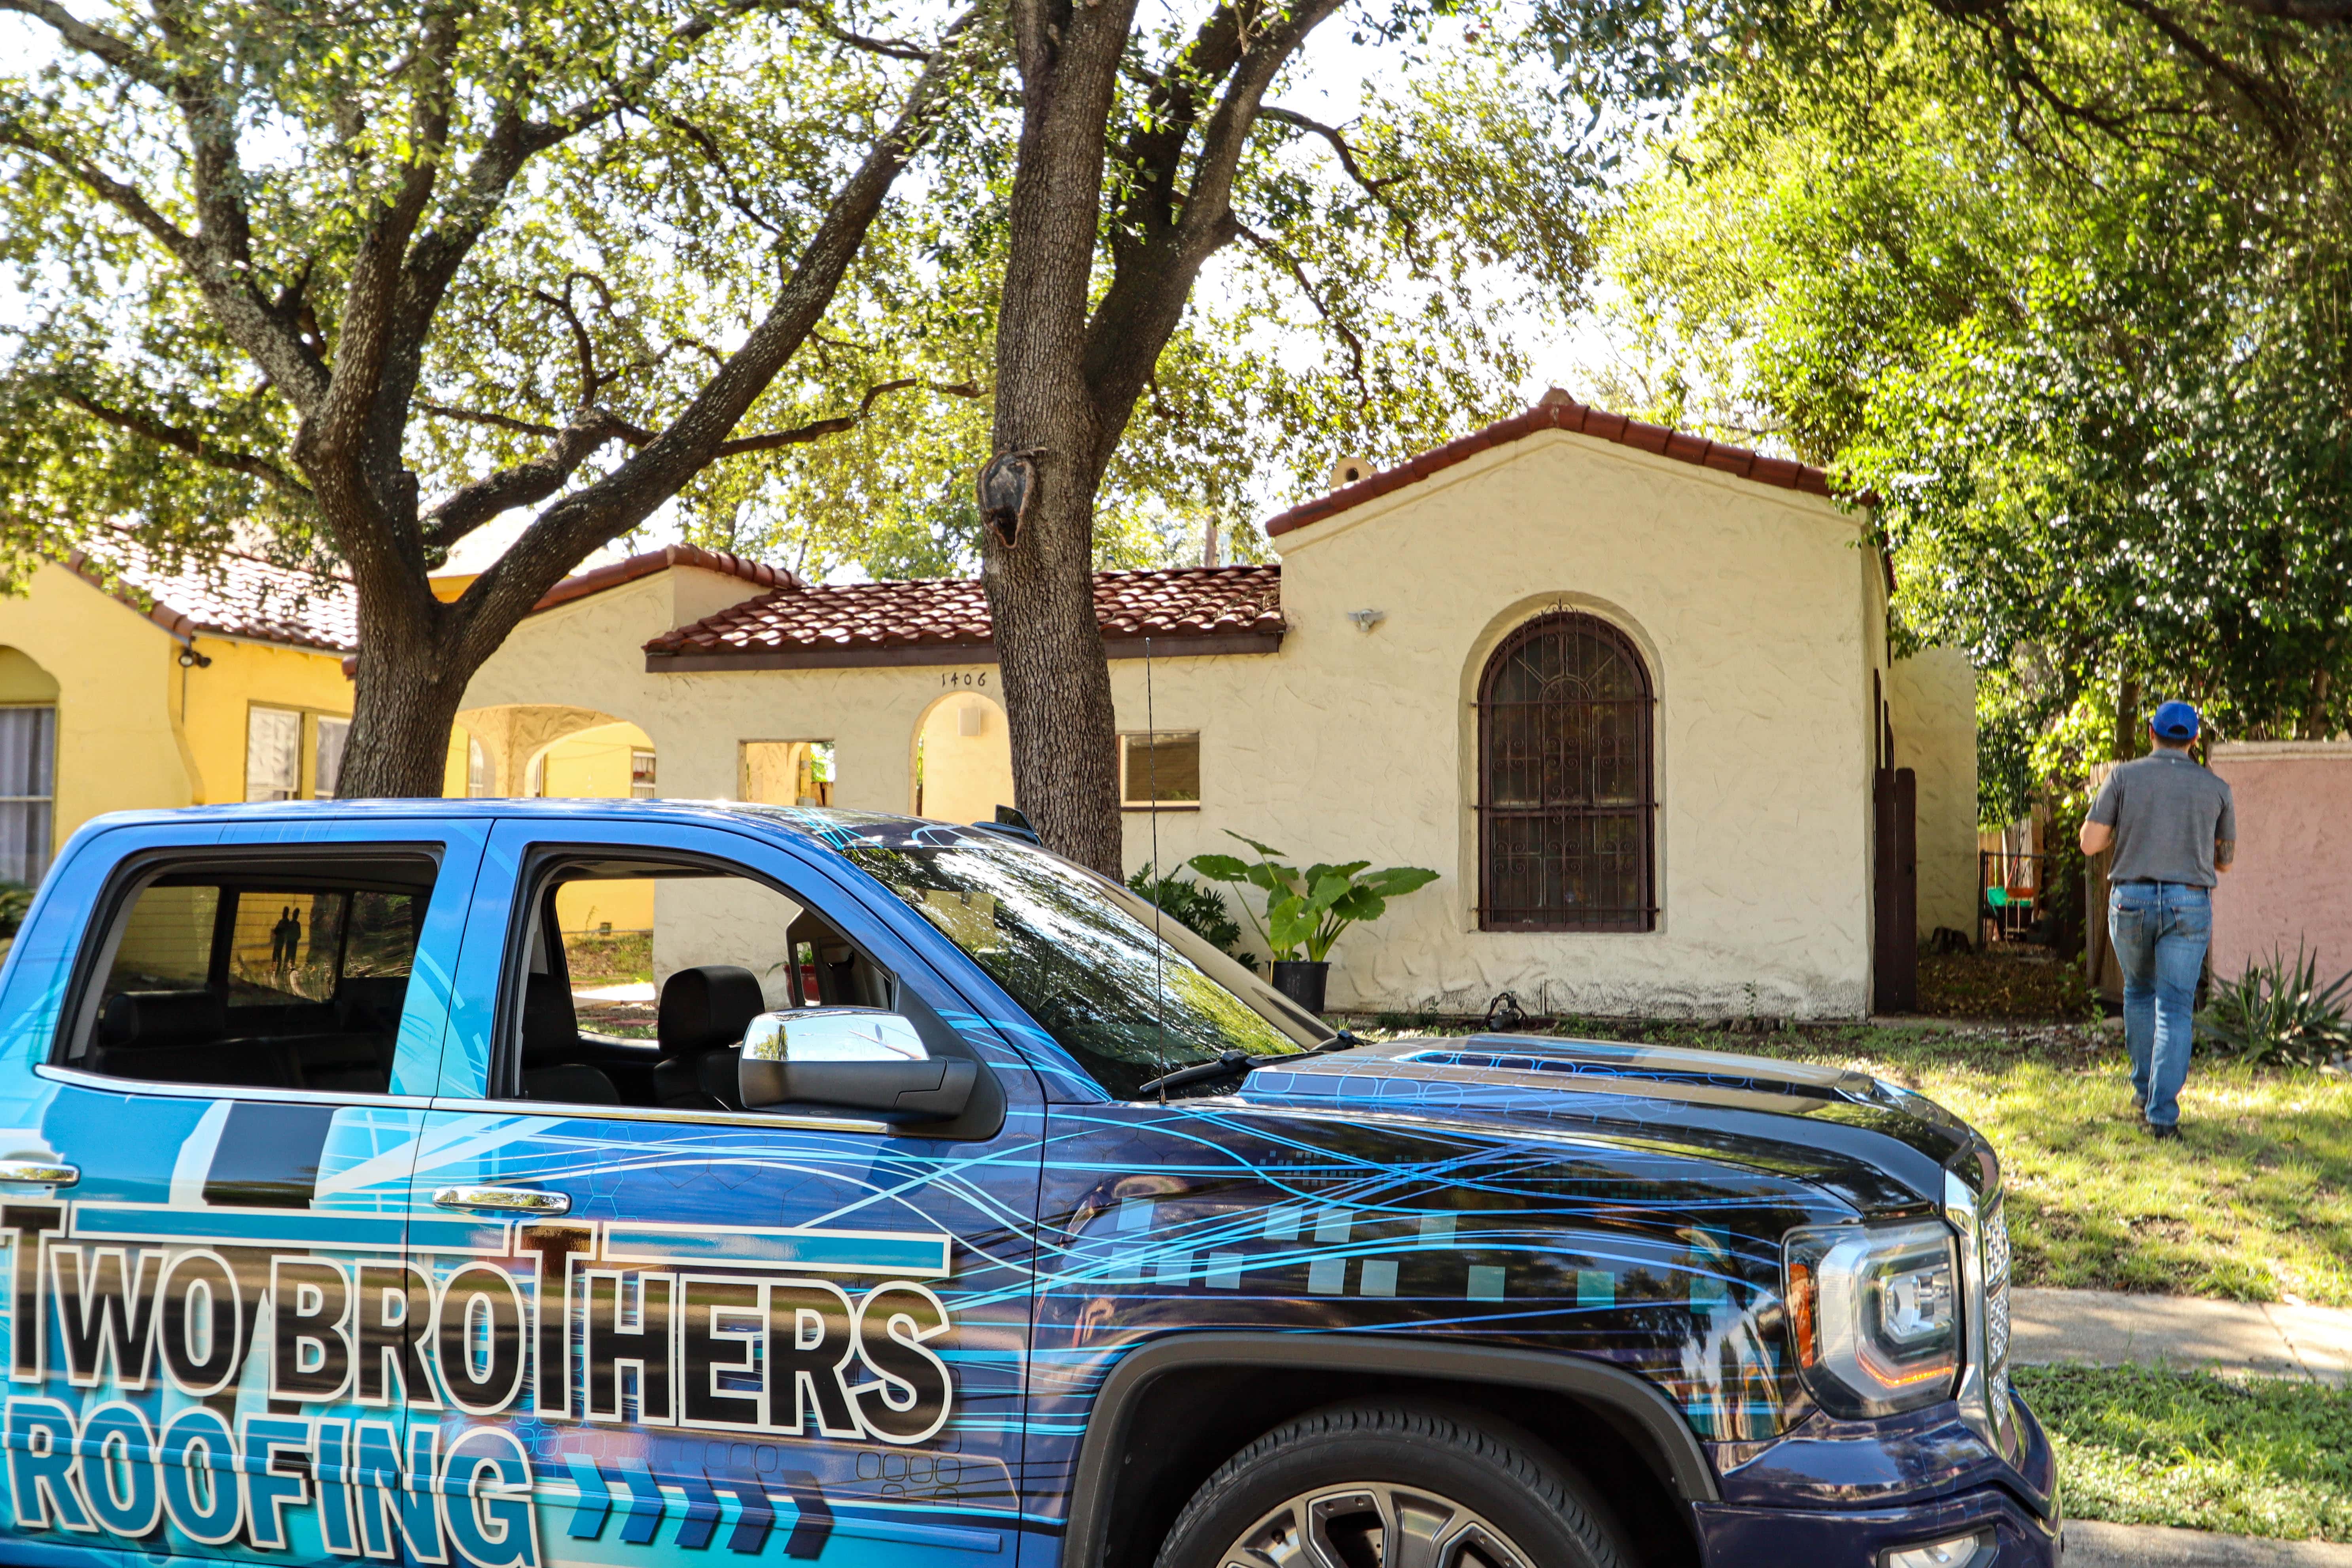 Two Brothers Roofing - San Antonio, TX, US, industrial roofing contractors